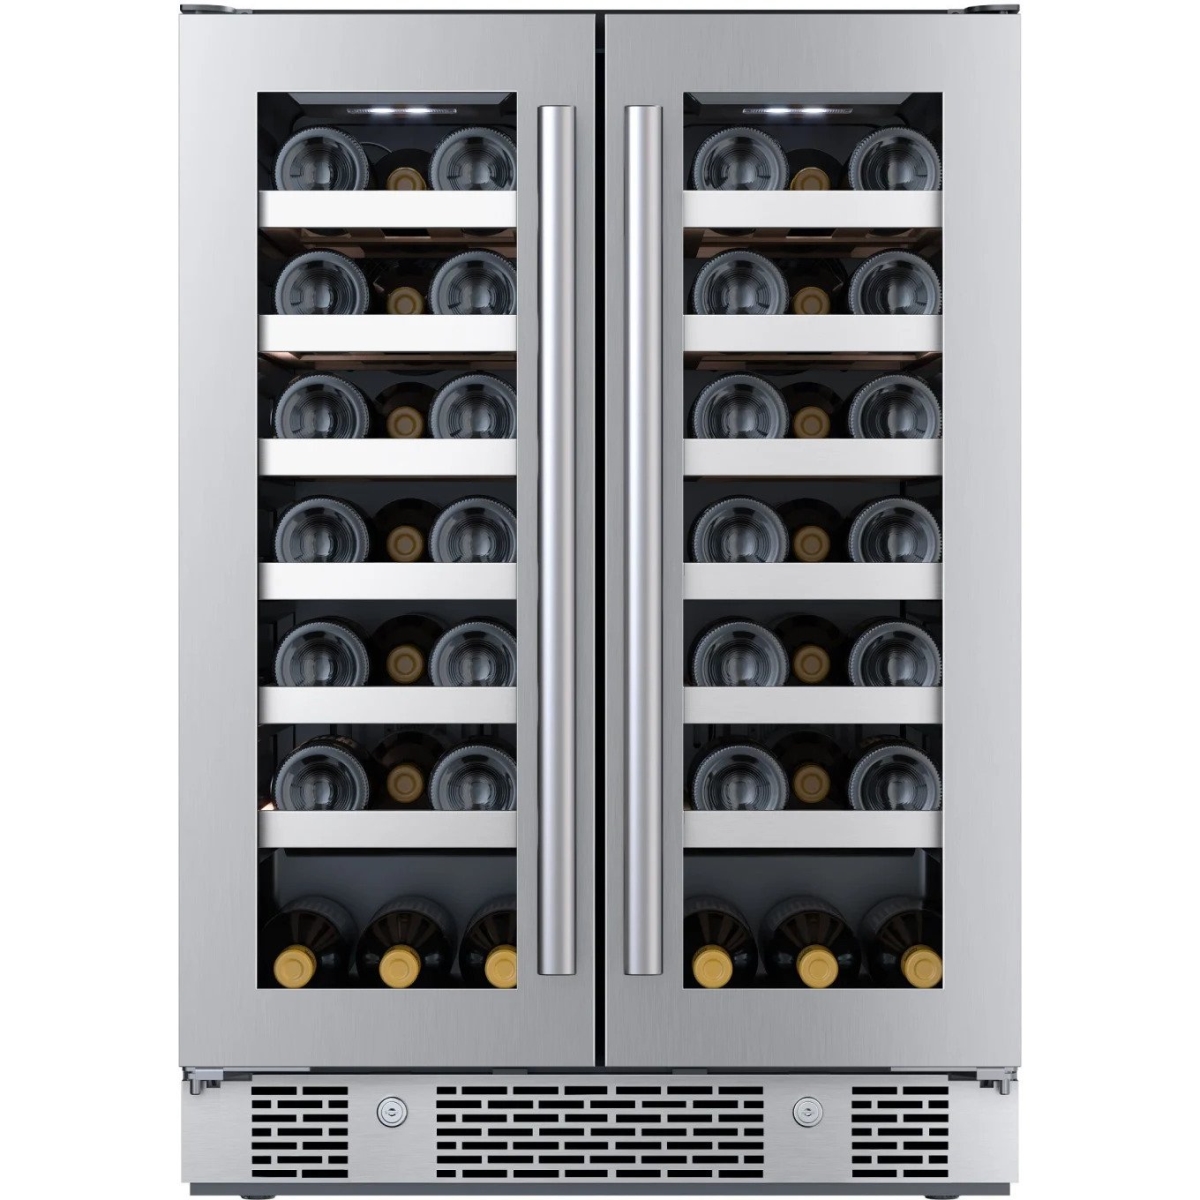 Picture of Avallon AWC242FD 24 in. Wide 42 Bottle Capacity French Door Wine Cooler with LED Lighting, Stainless Steel